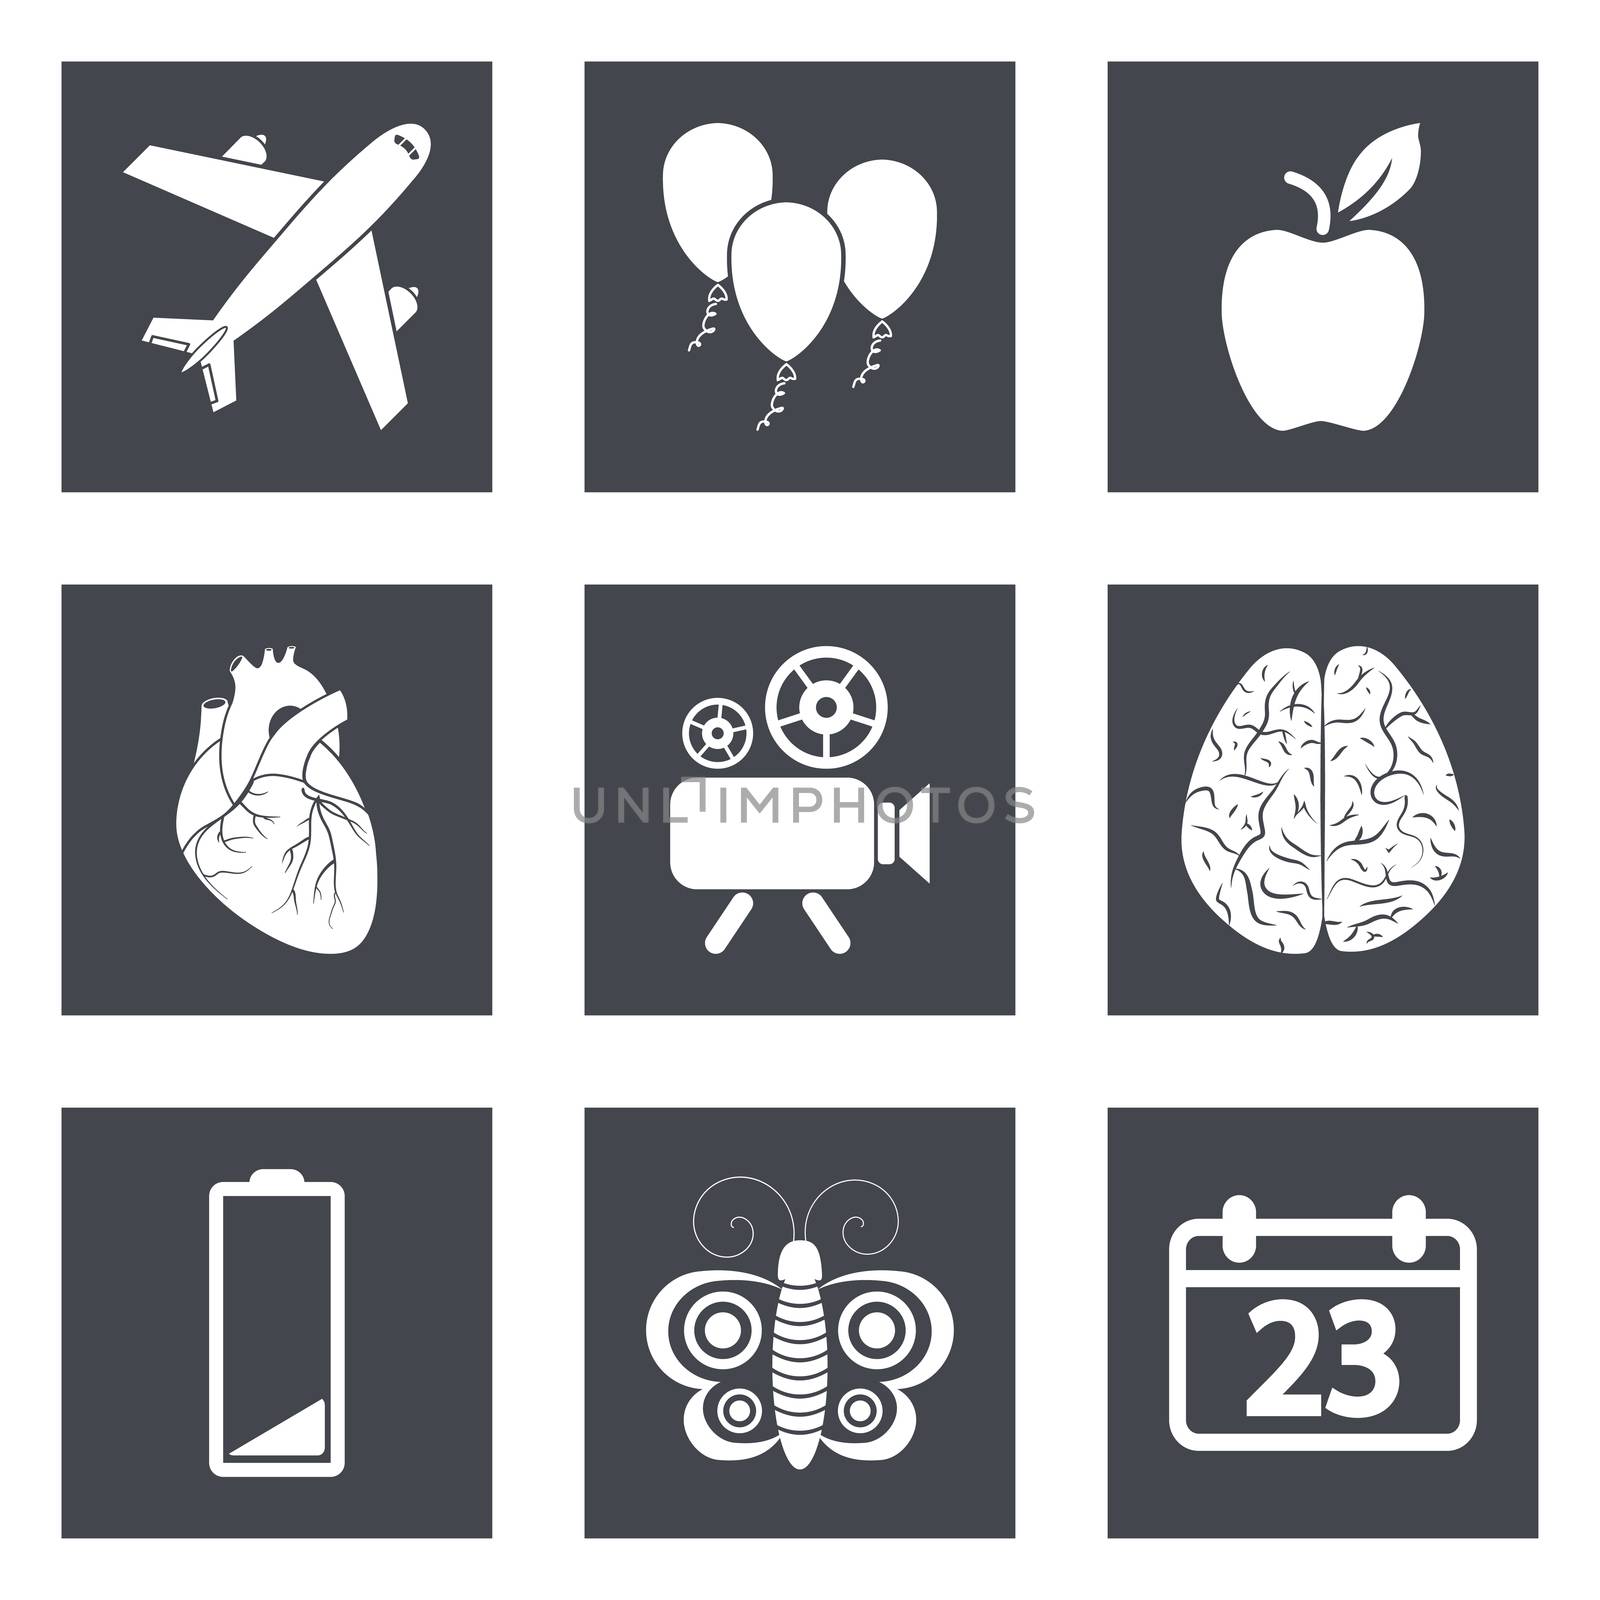 Icons for Web Design and Mobile Applications set 2. Vector illustration.